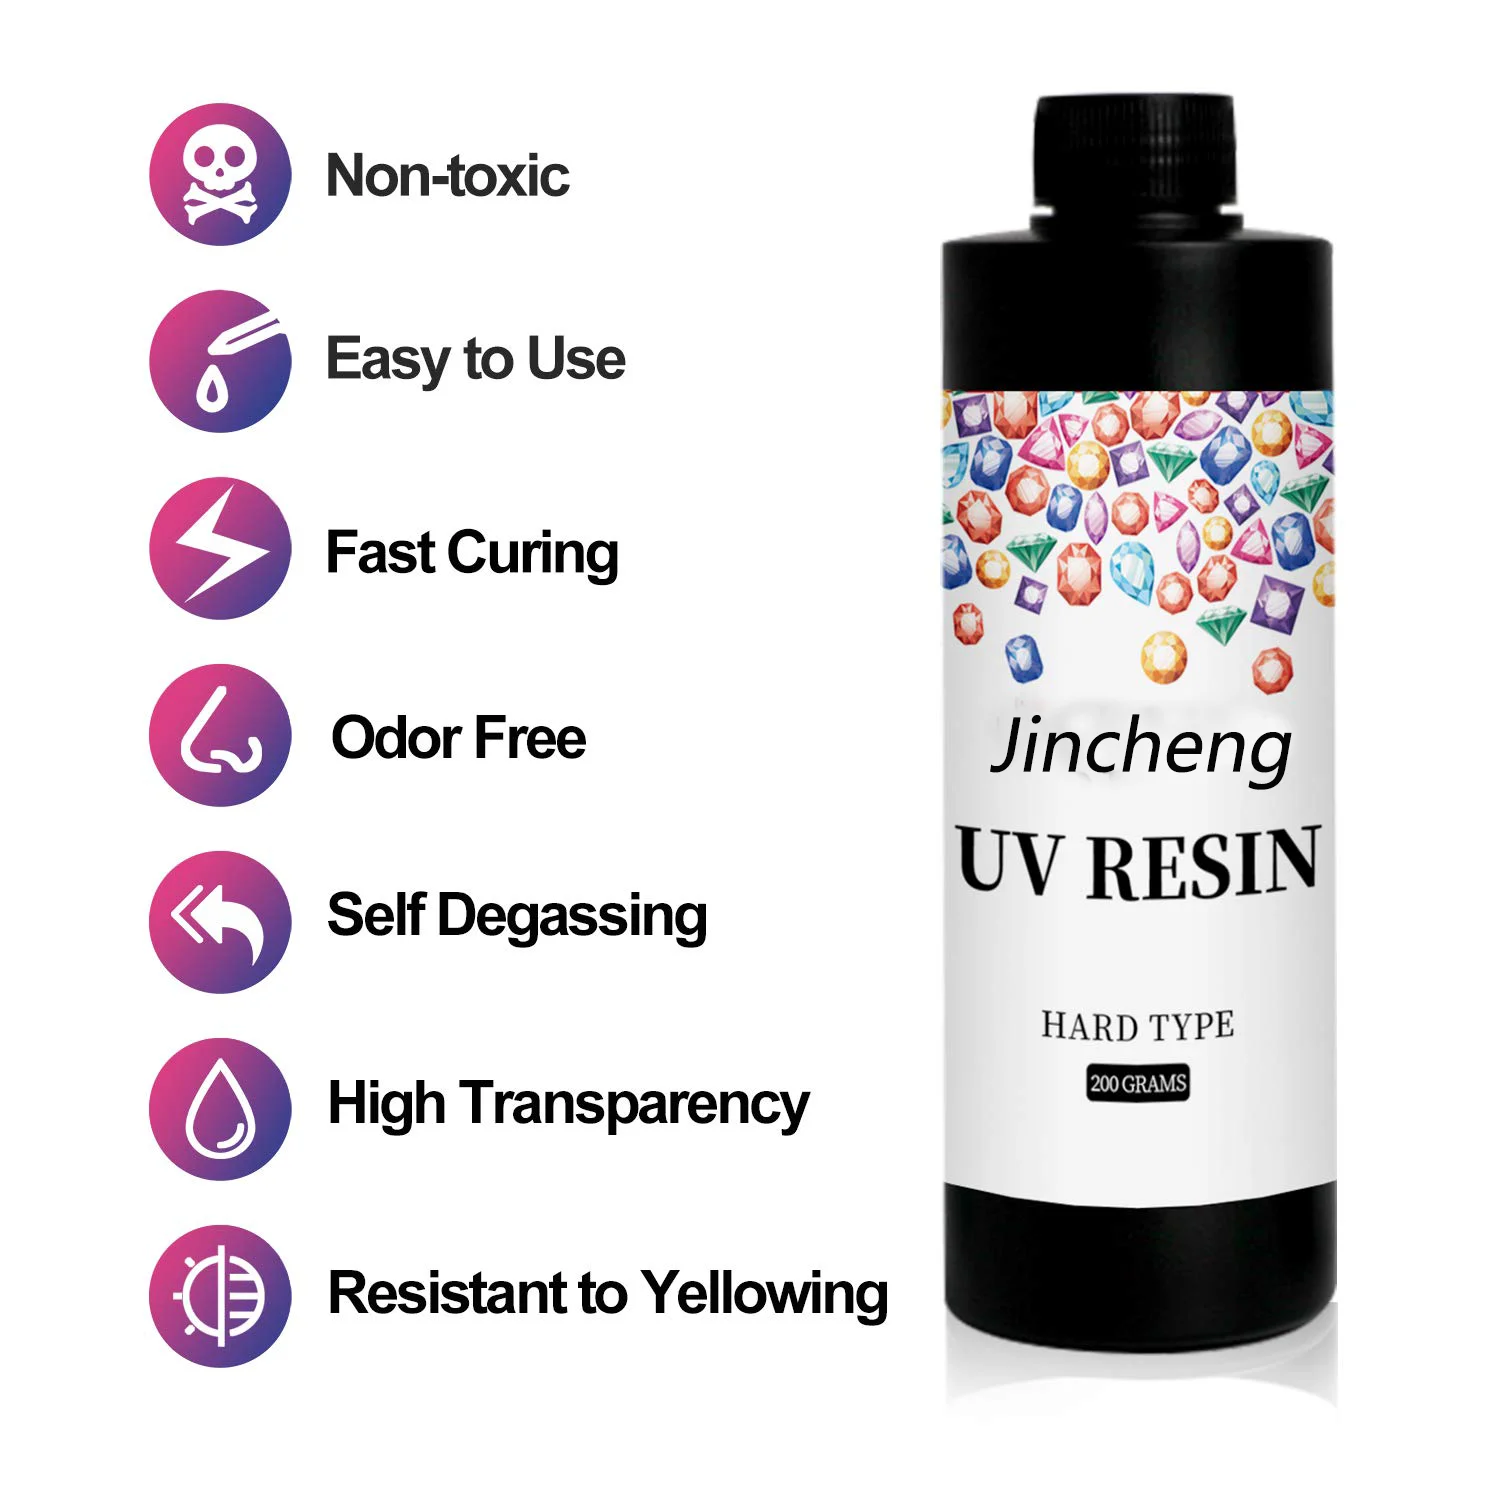 UV Resin 200g Crystal Clear Ultraviolet Curing Epoxy Resin for DIY Jewelry Making